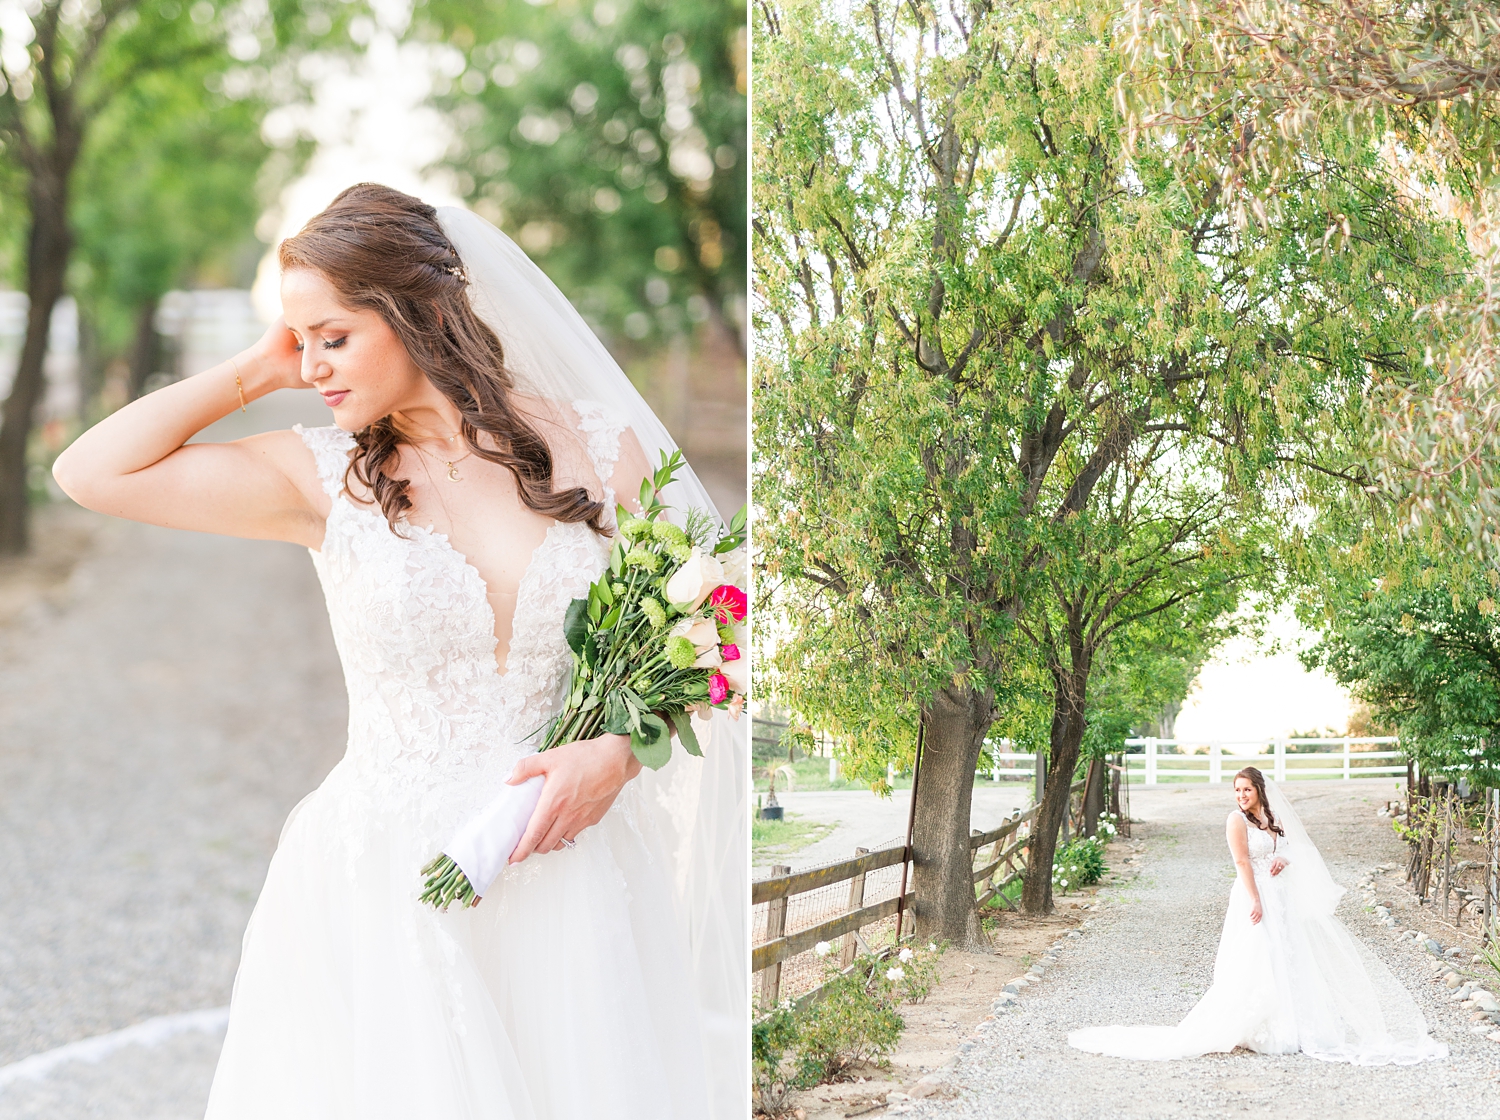 Bridal Session in a winery in temecula from a Temecula Wedding Photographer_0018.jpg